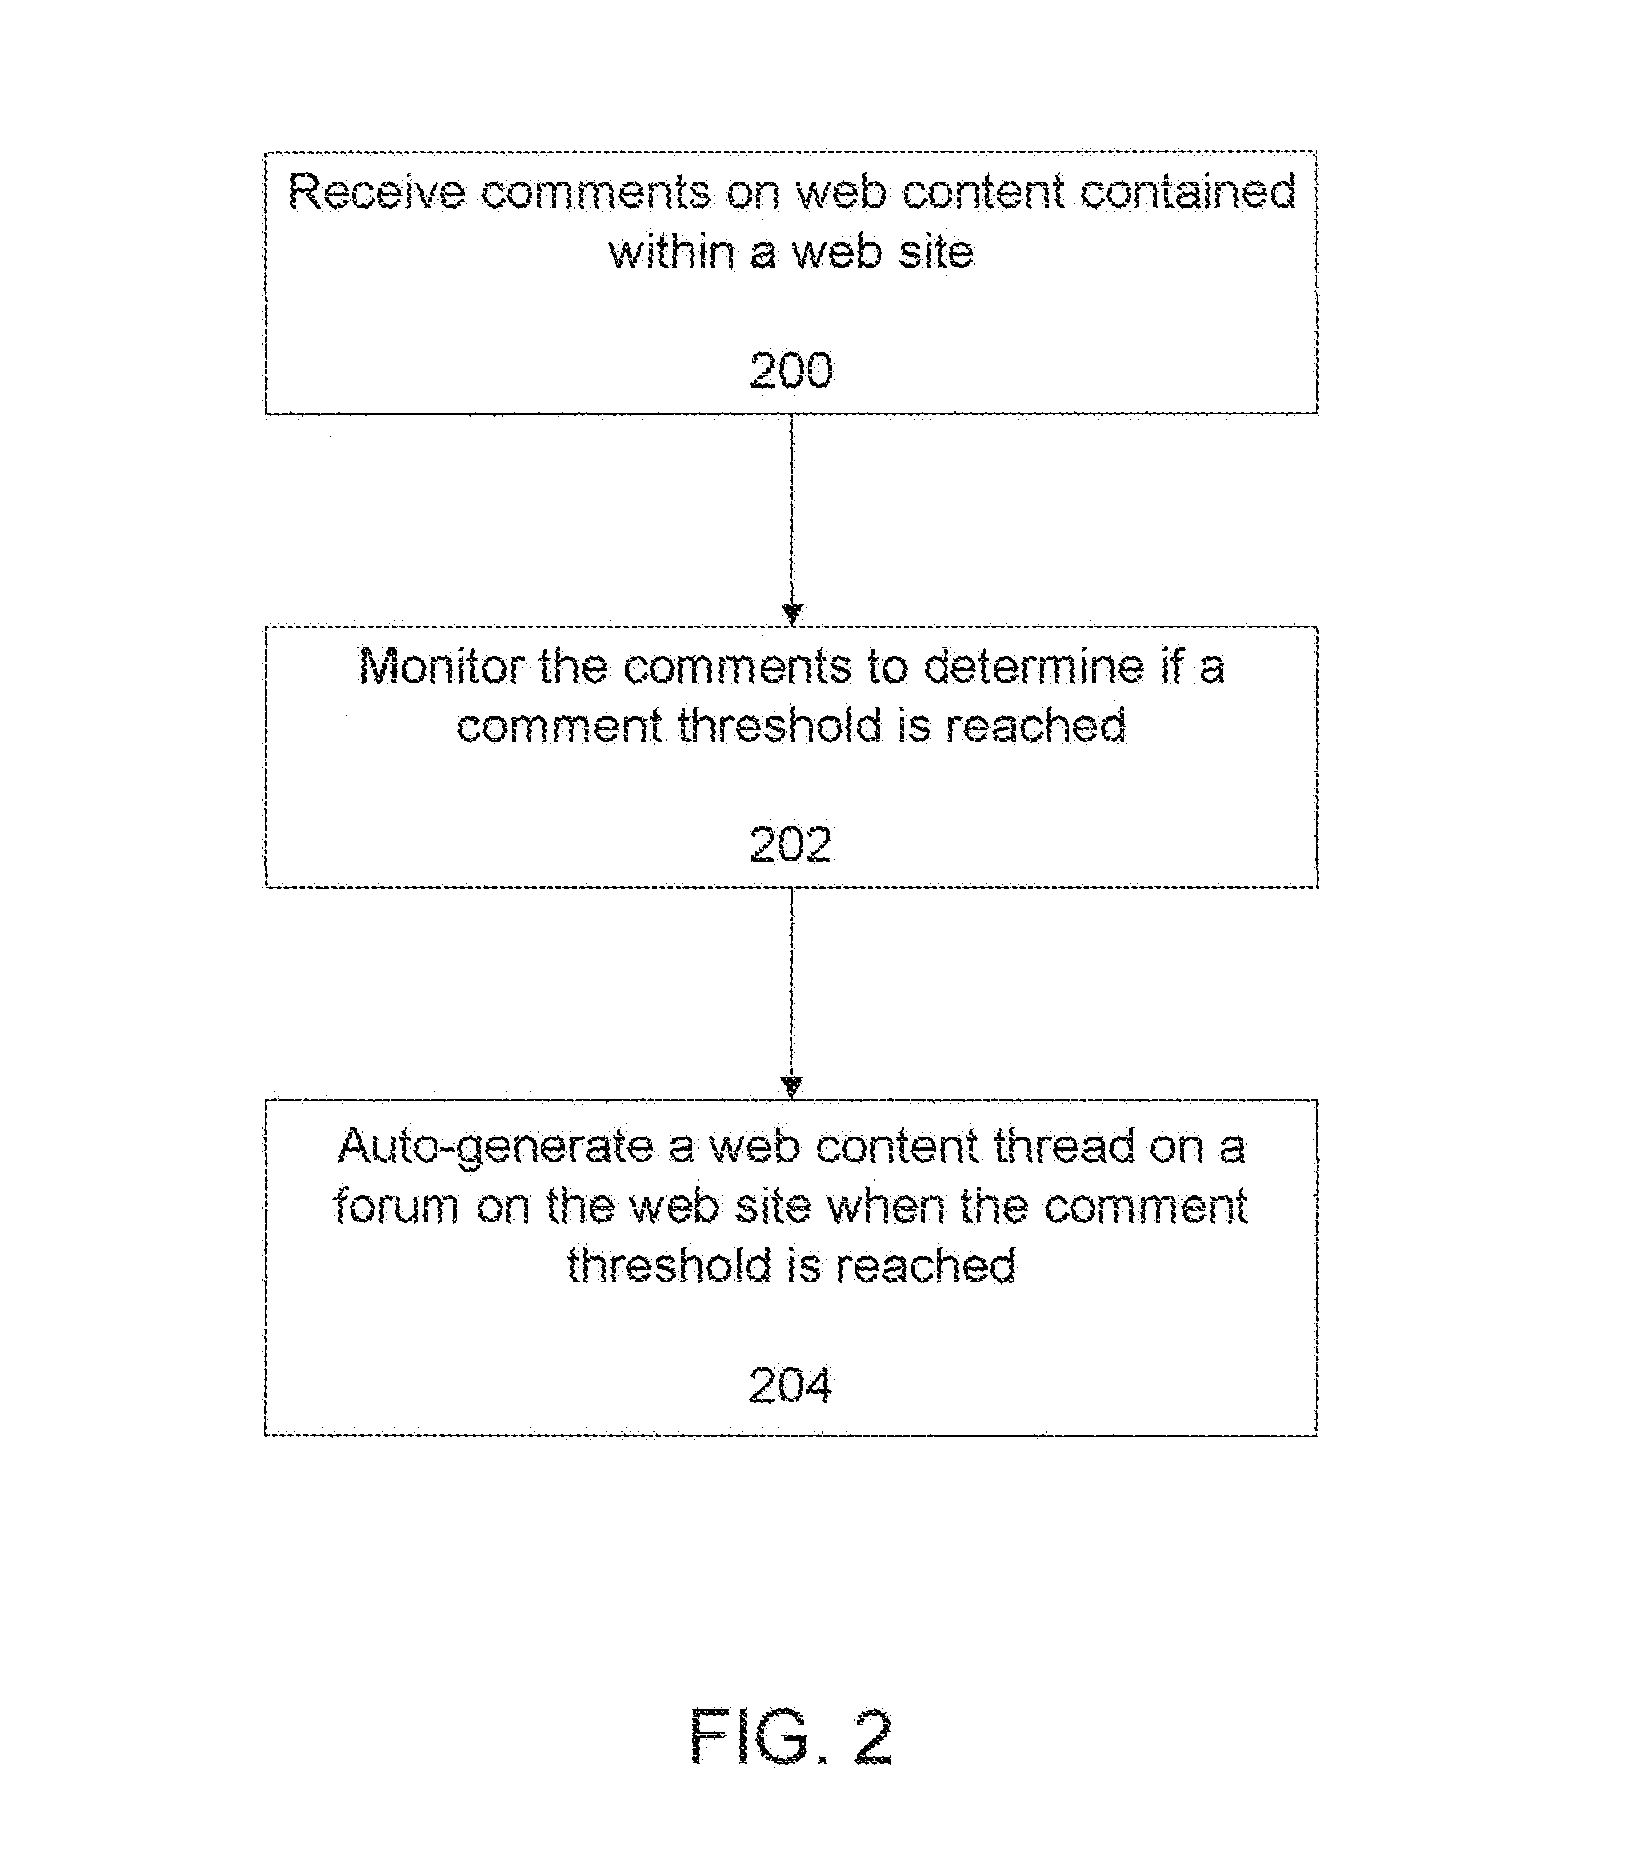 System and method for auto-generating threads on web forums